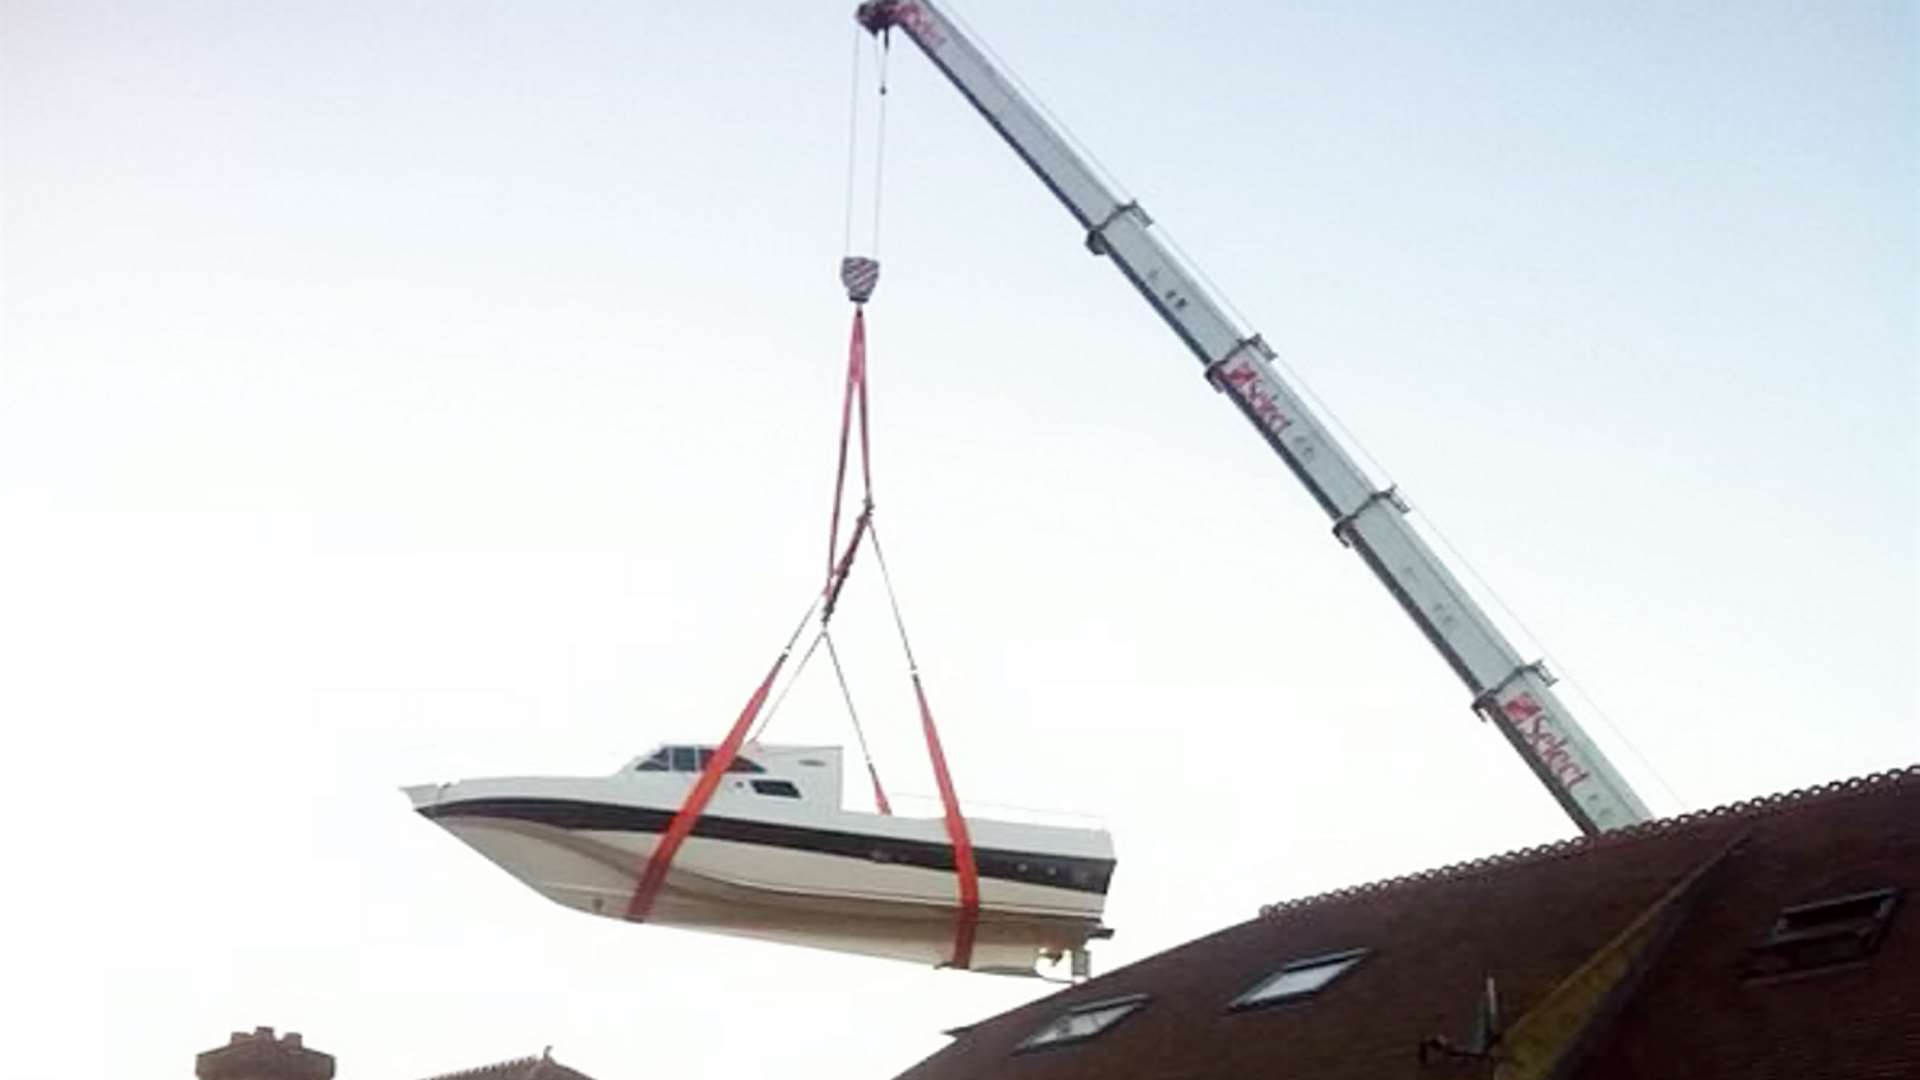 The crane was brought in to get the boat out to sea. Picture: SWNS